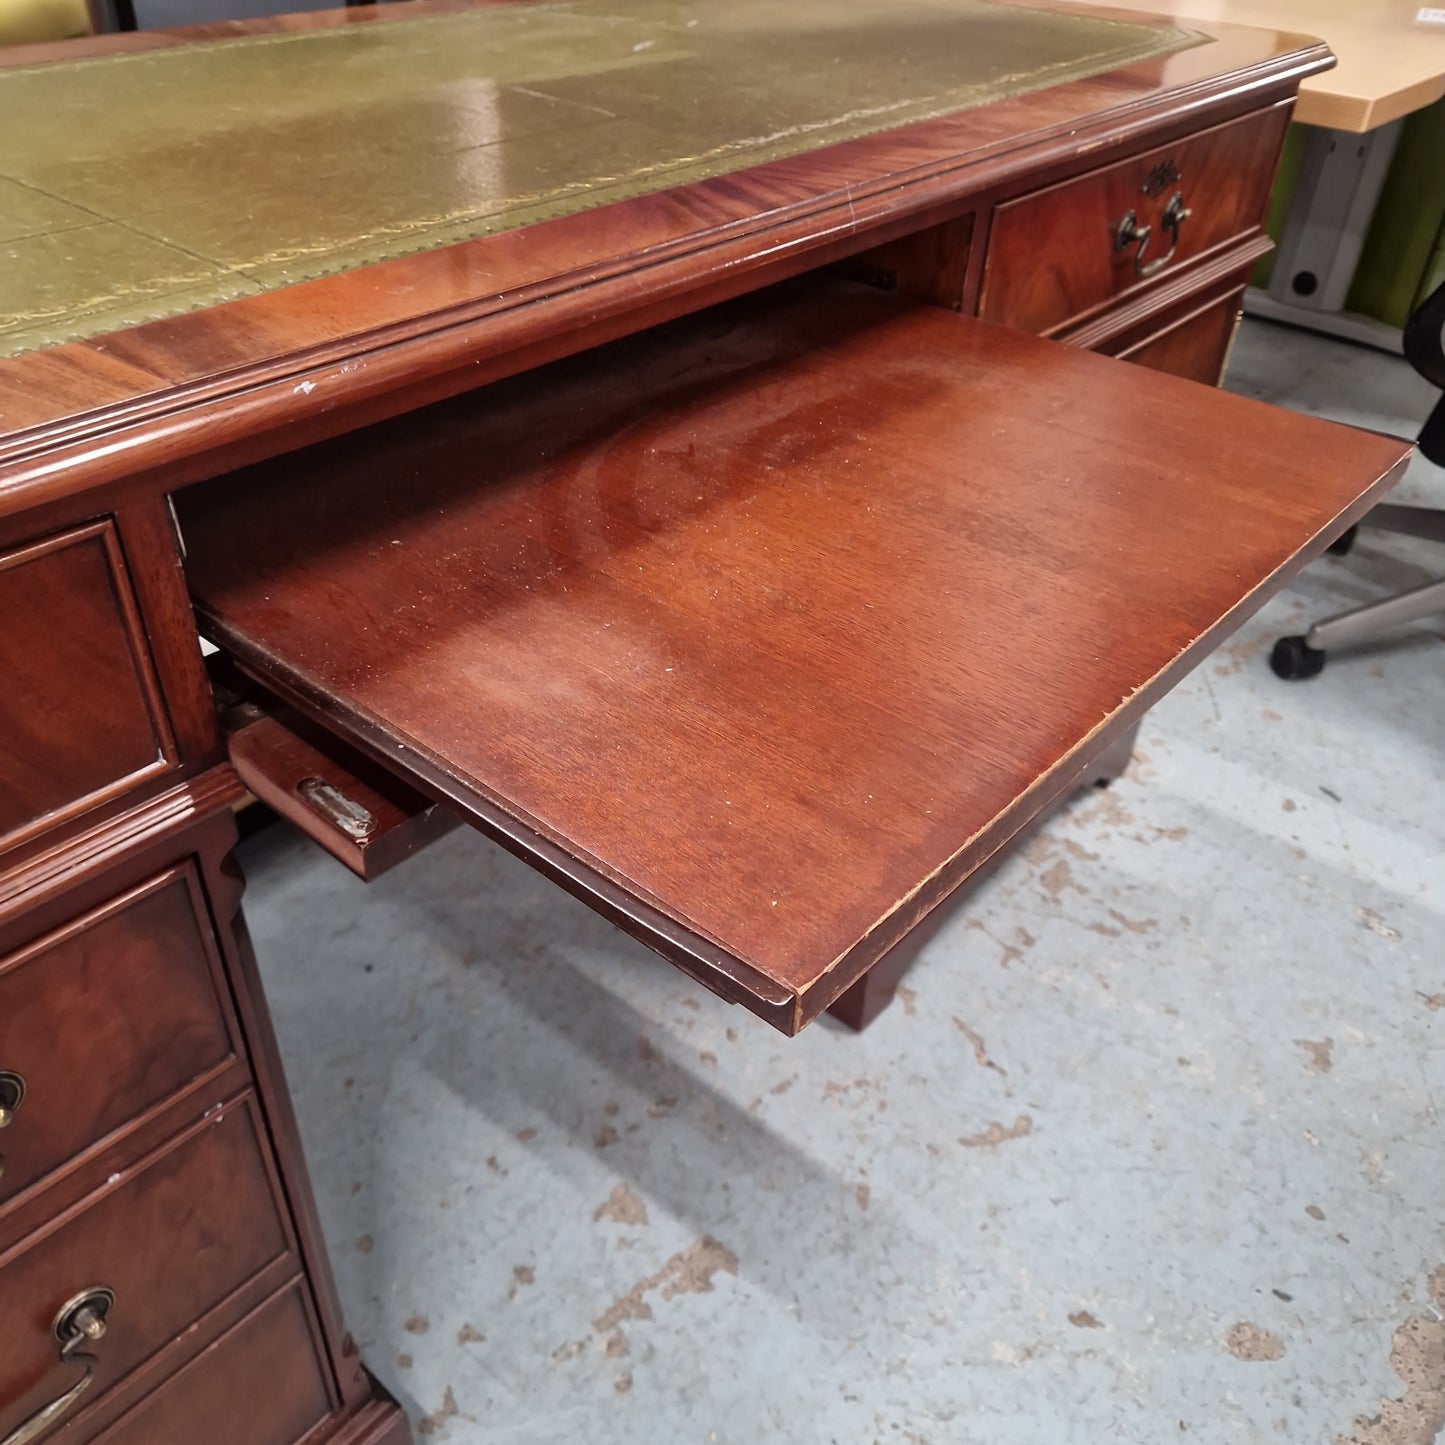 Ornate reproduction mahogany partners desk with drawers and green and gold emobossed leather top